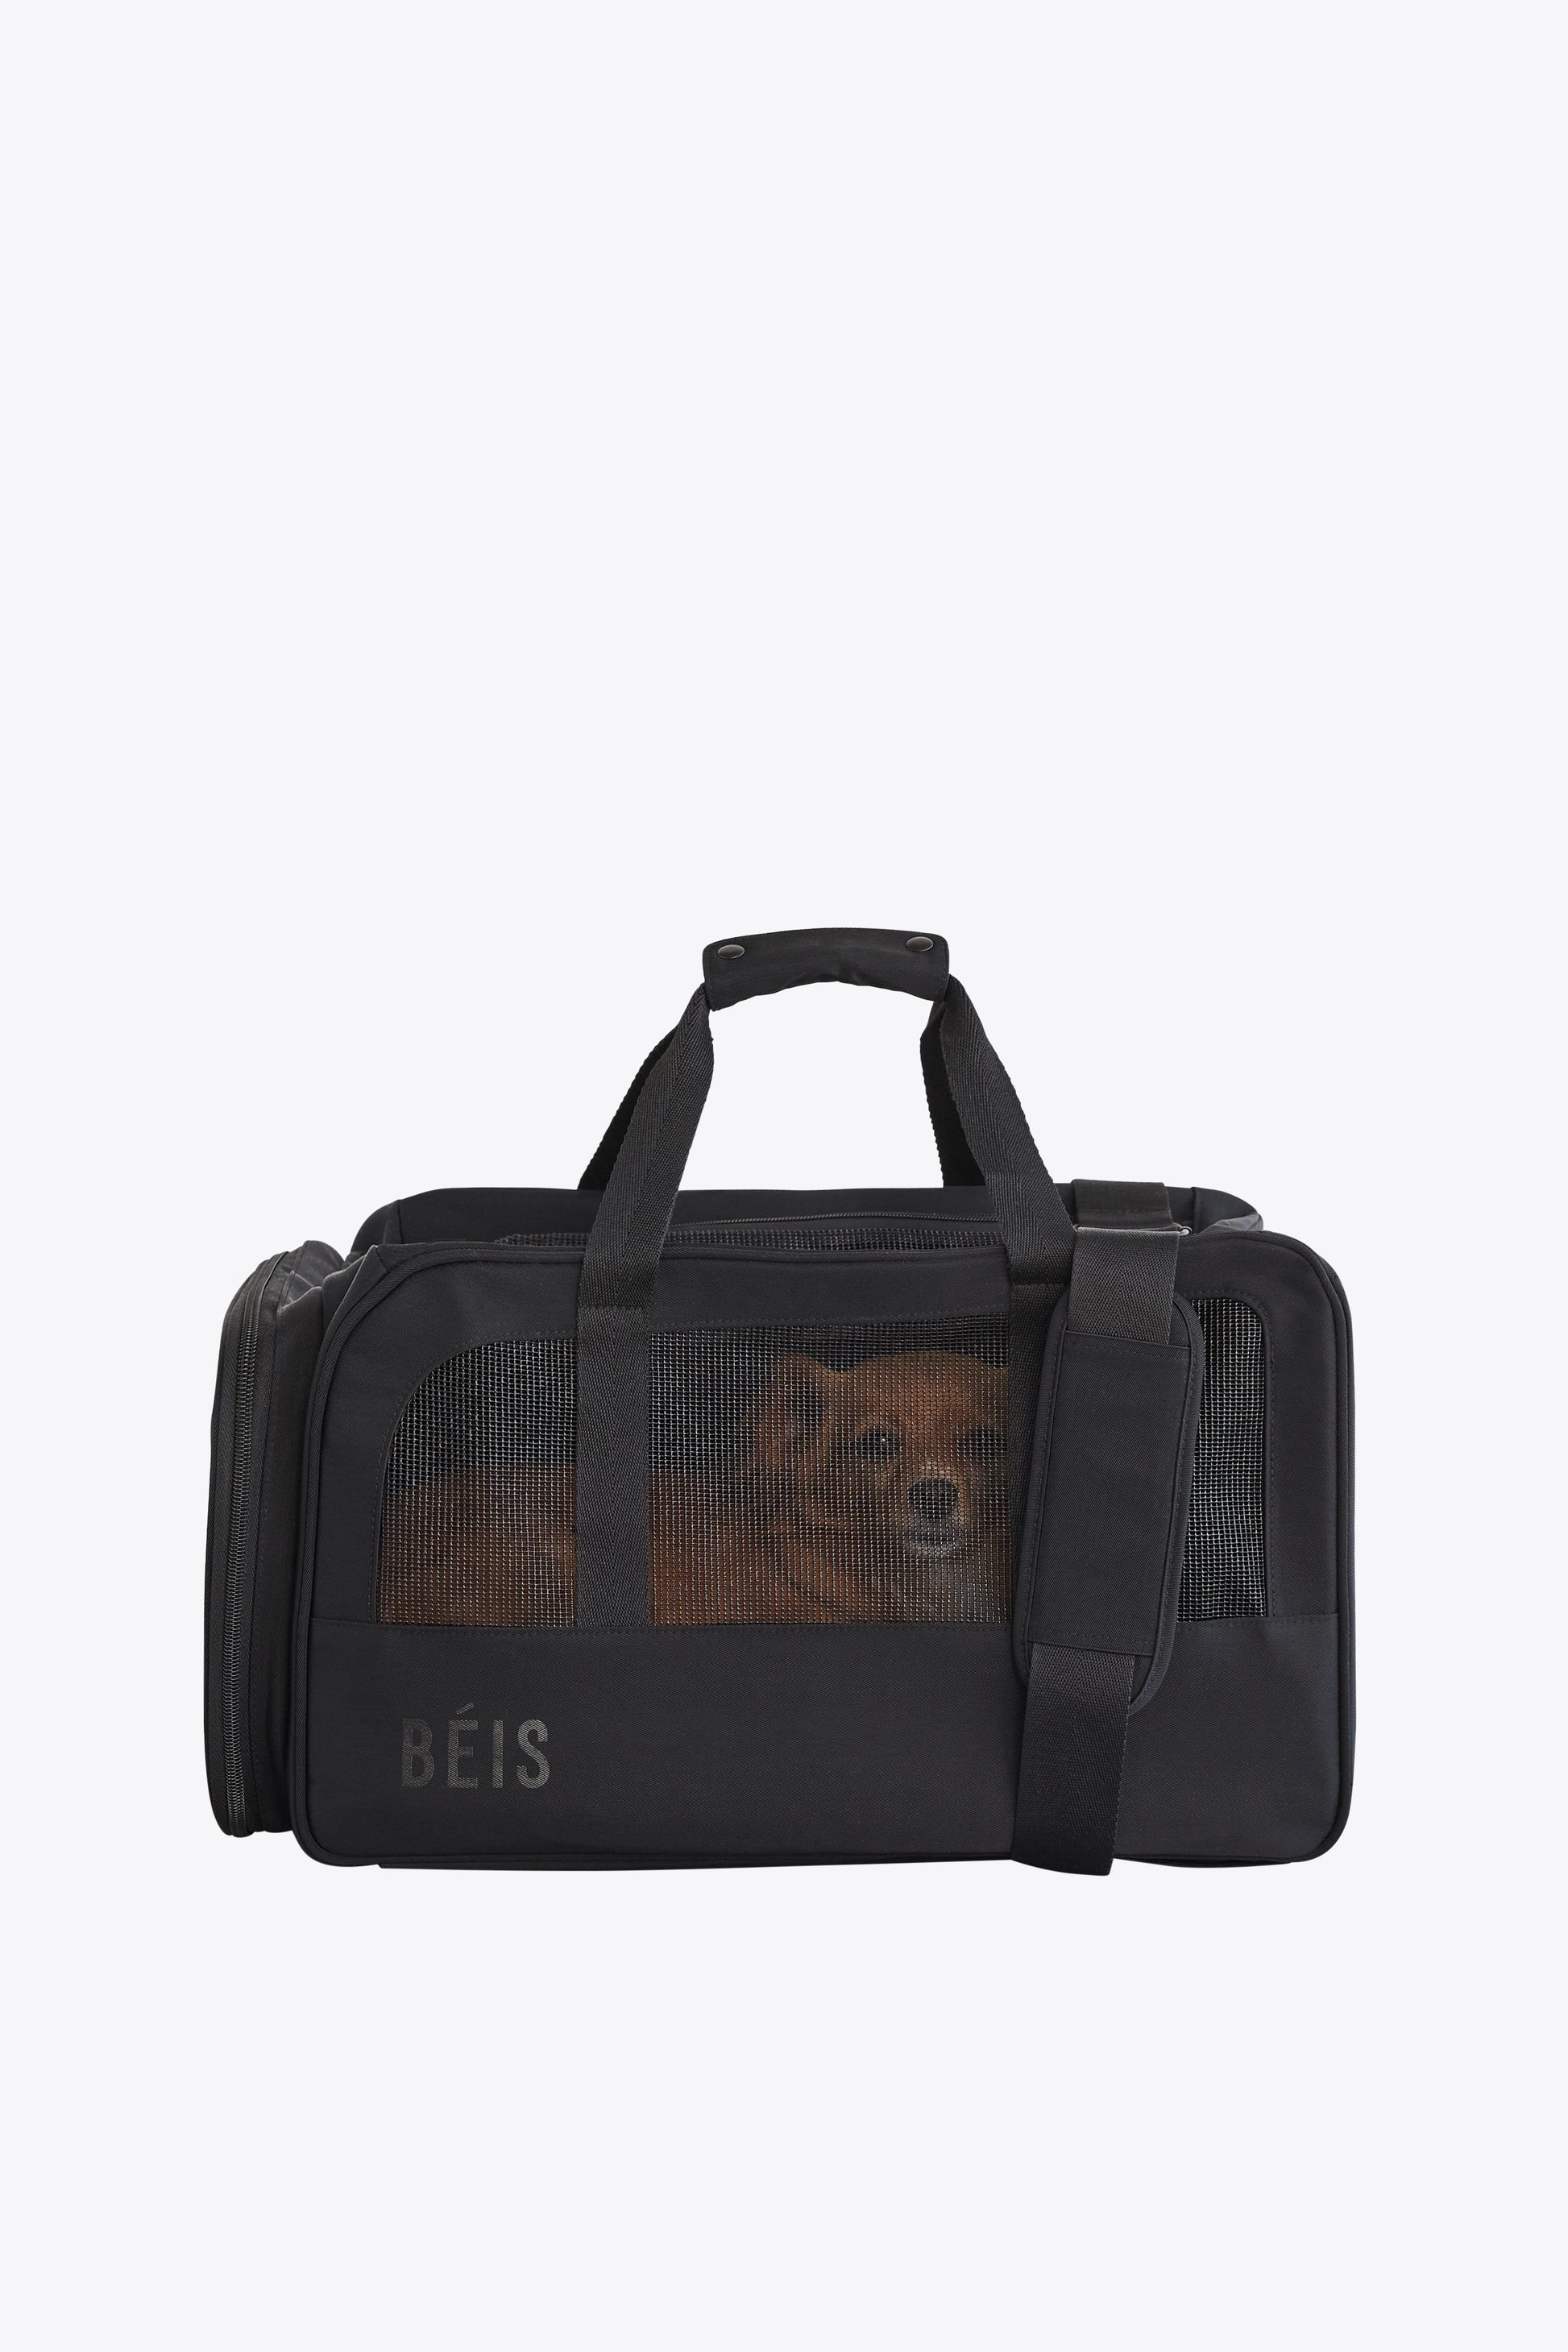 The Regulation Pet Carry-on in Beige